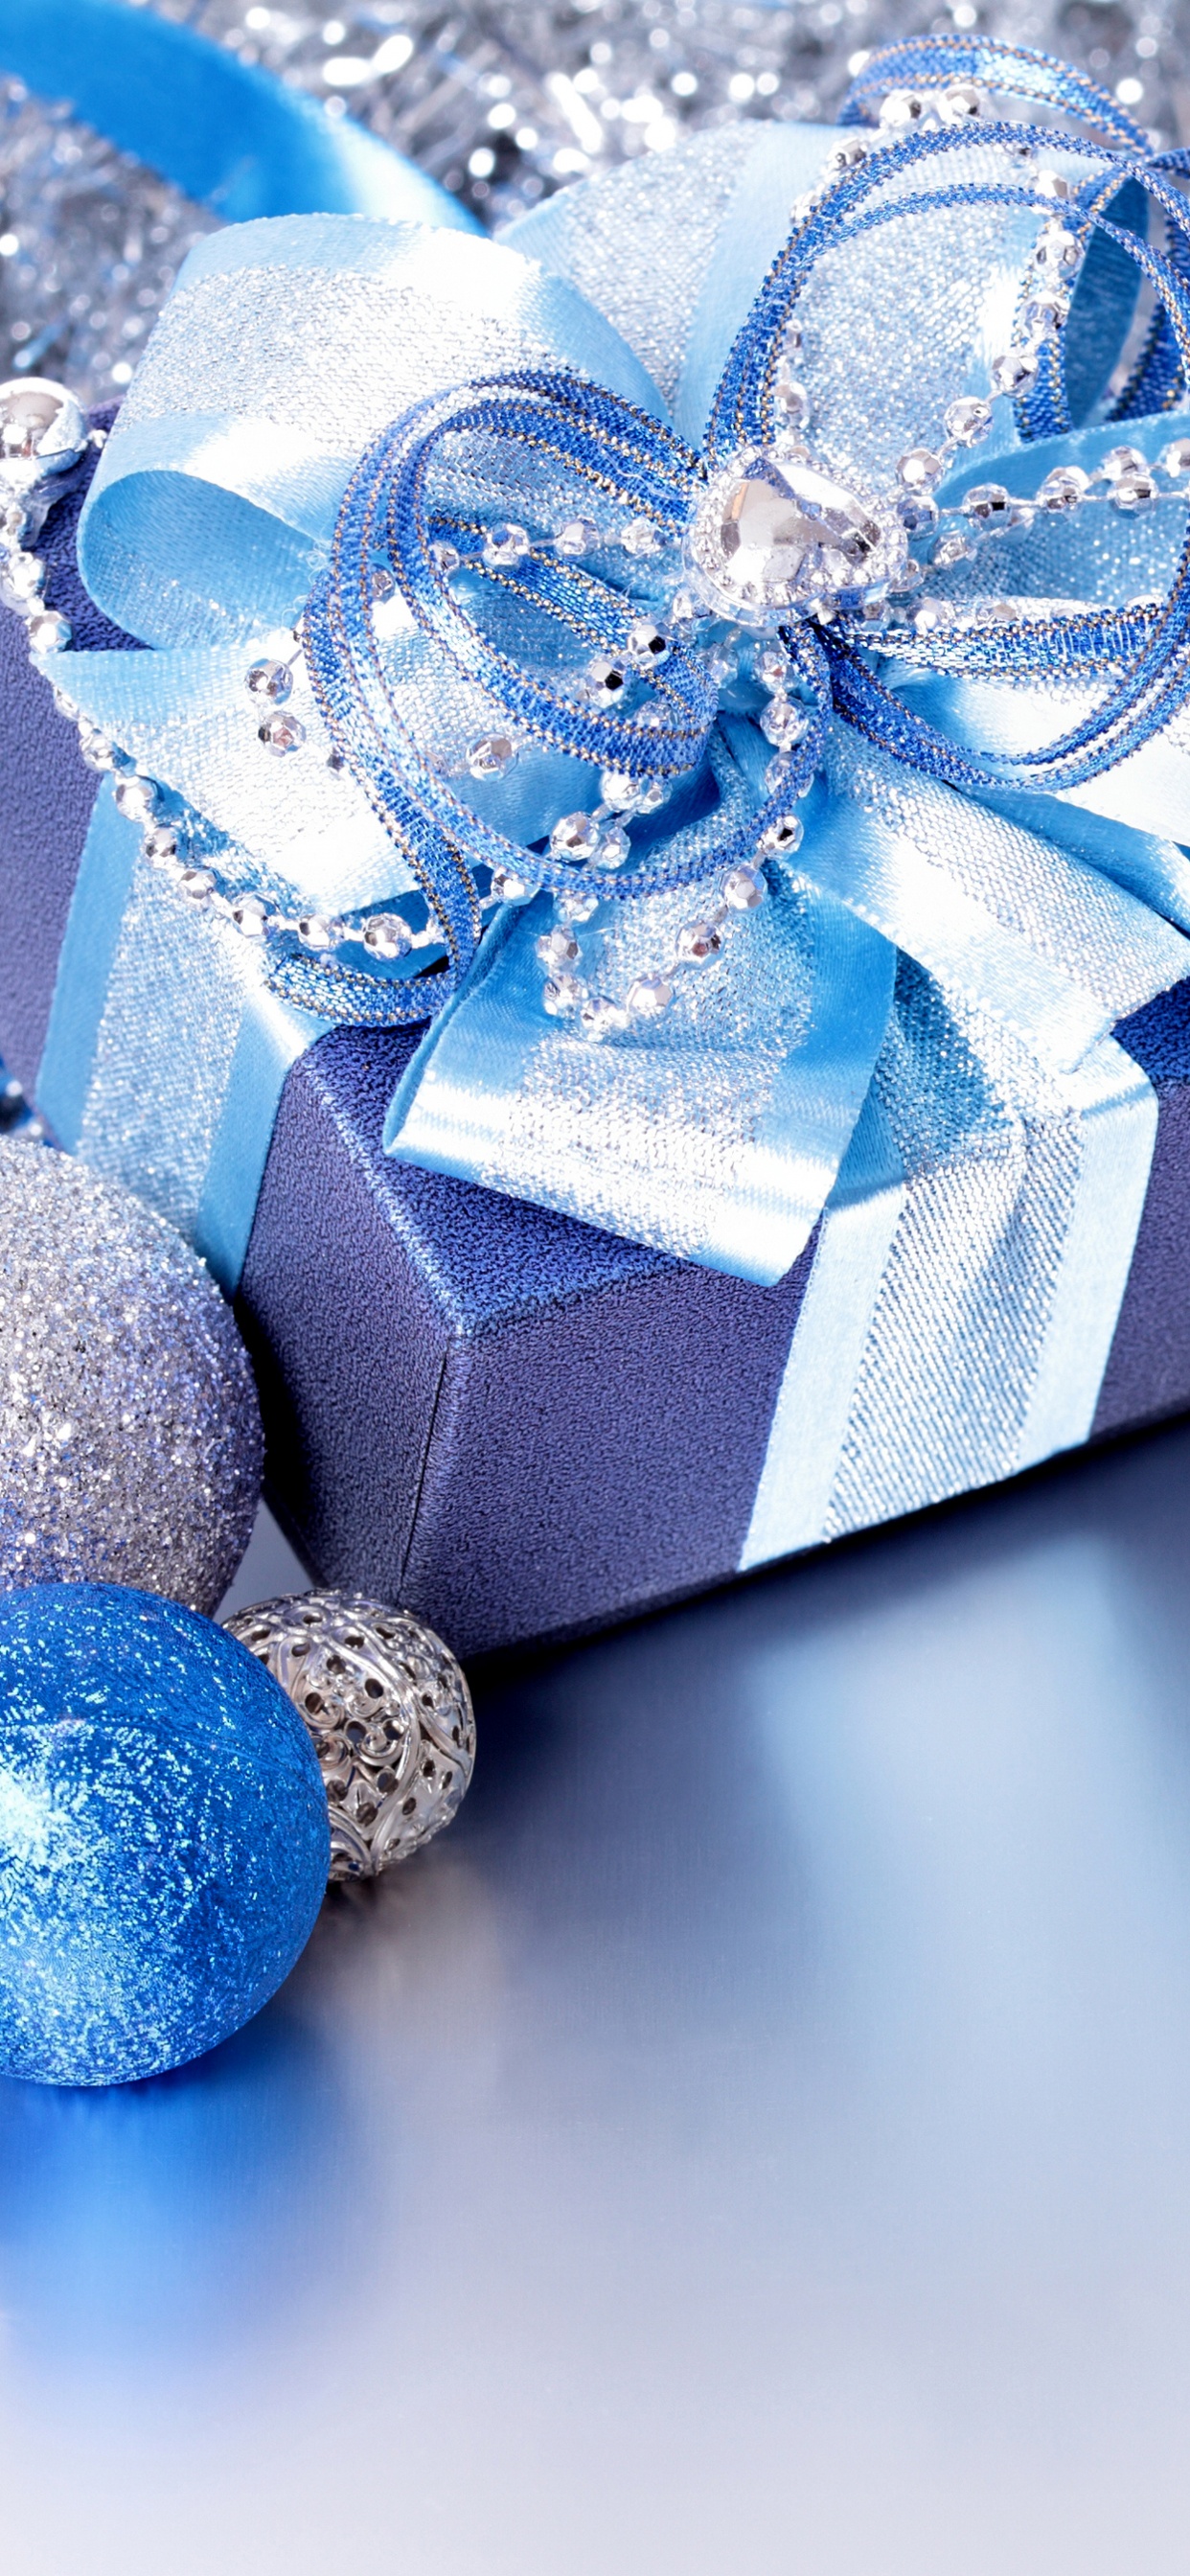 Christmas Day, Christmas Ornament, Christmas Decoration, Gift, Blue. Wallpaper in 1242x2688 Resolution